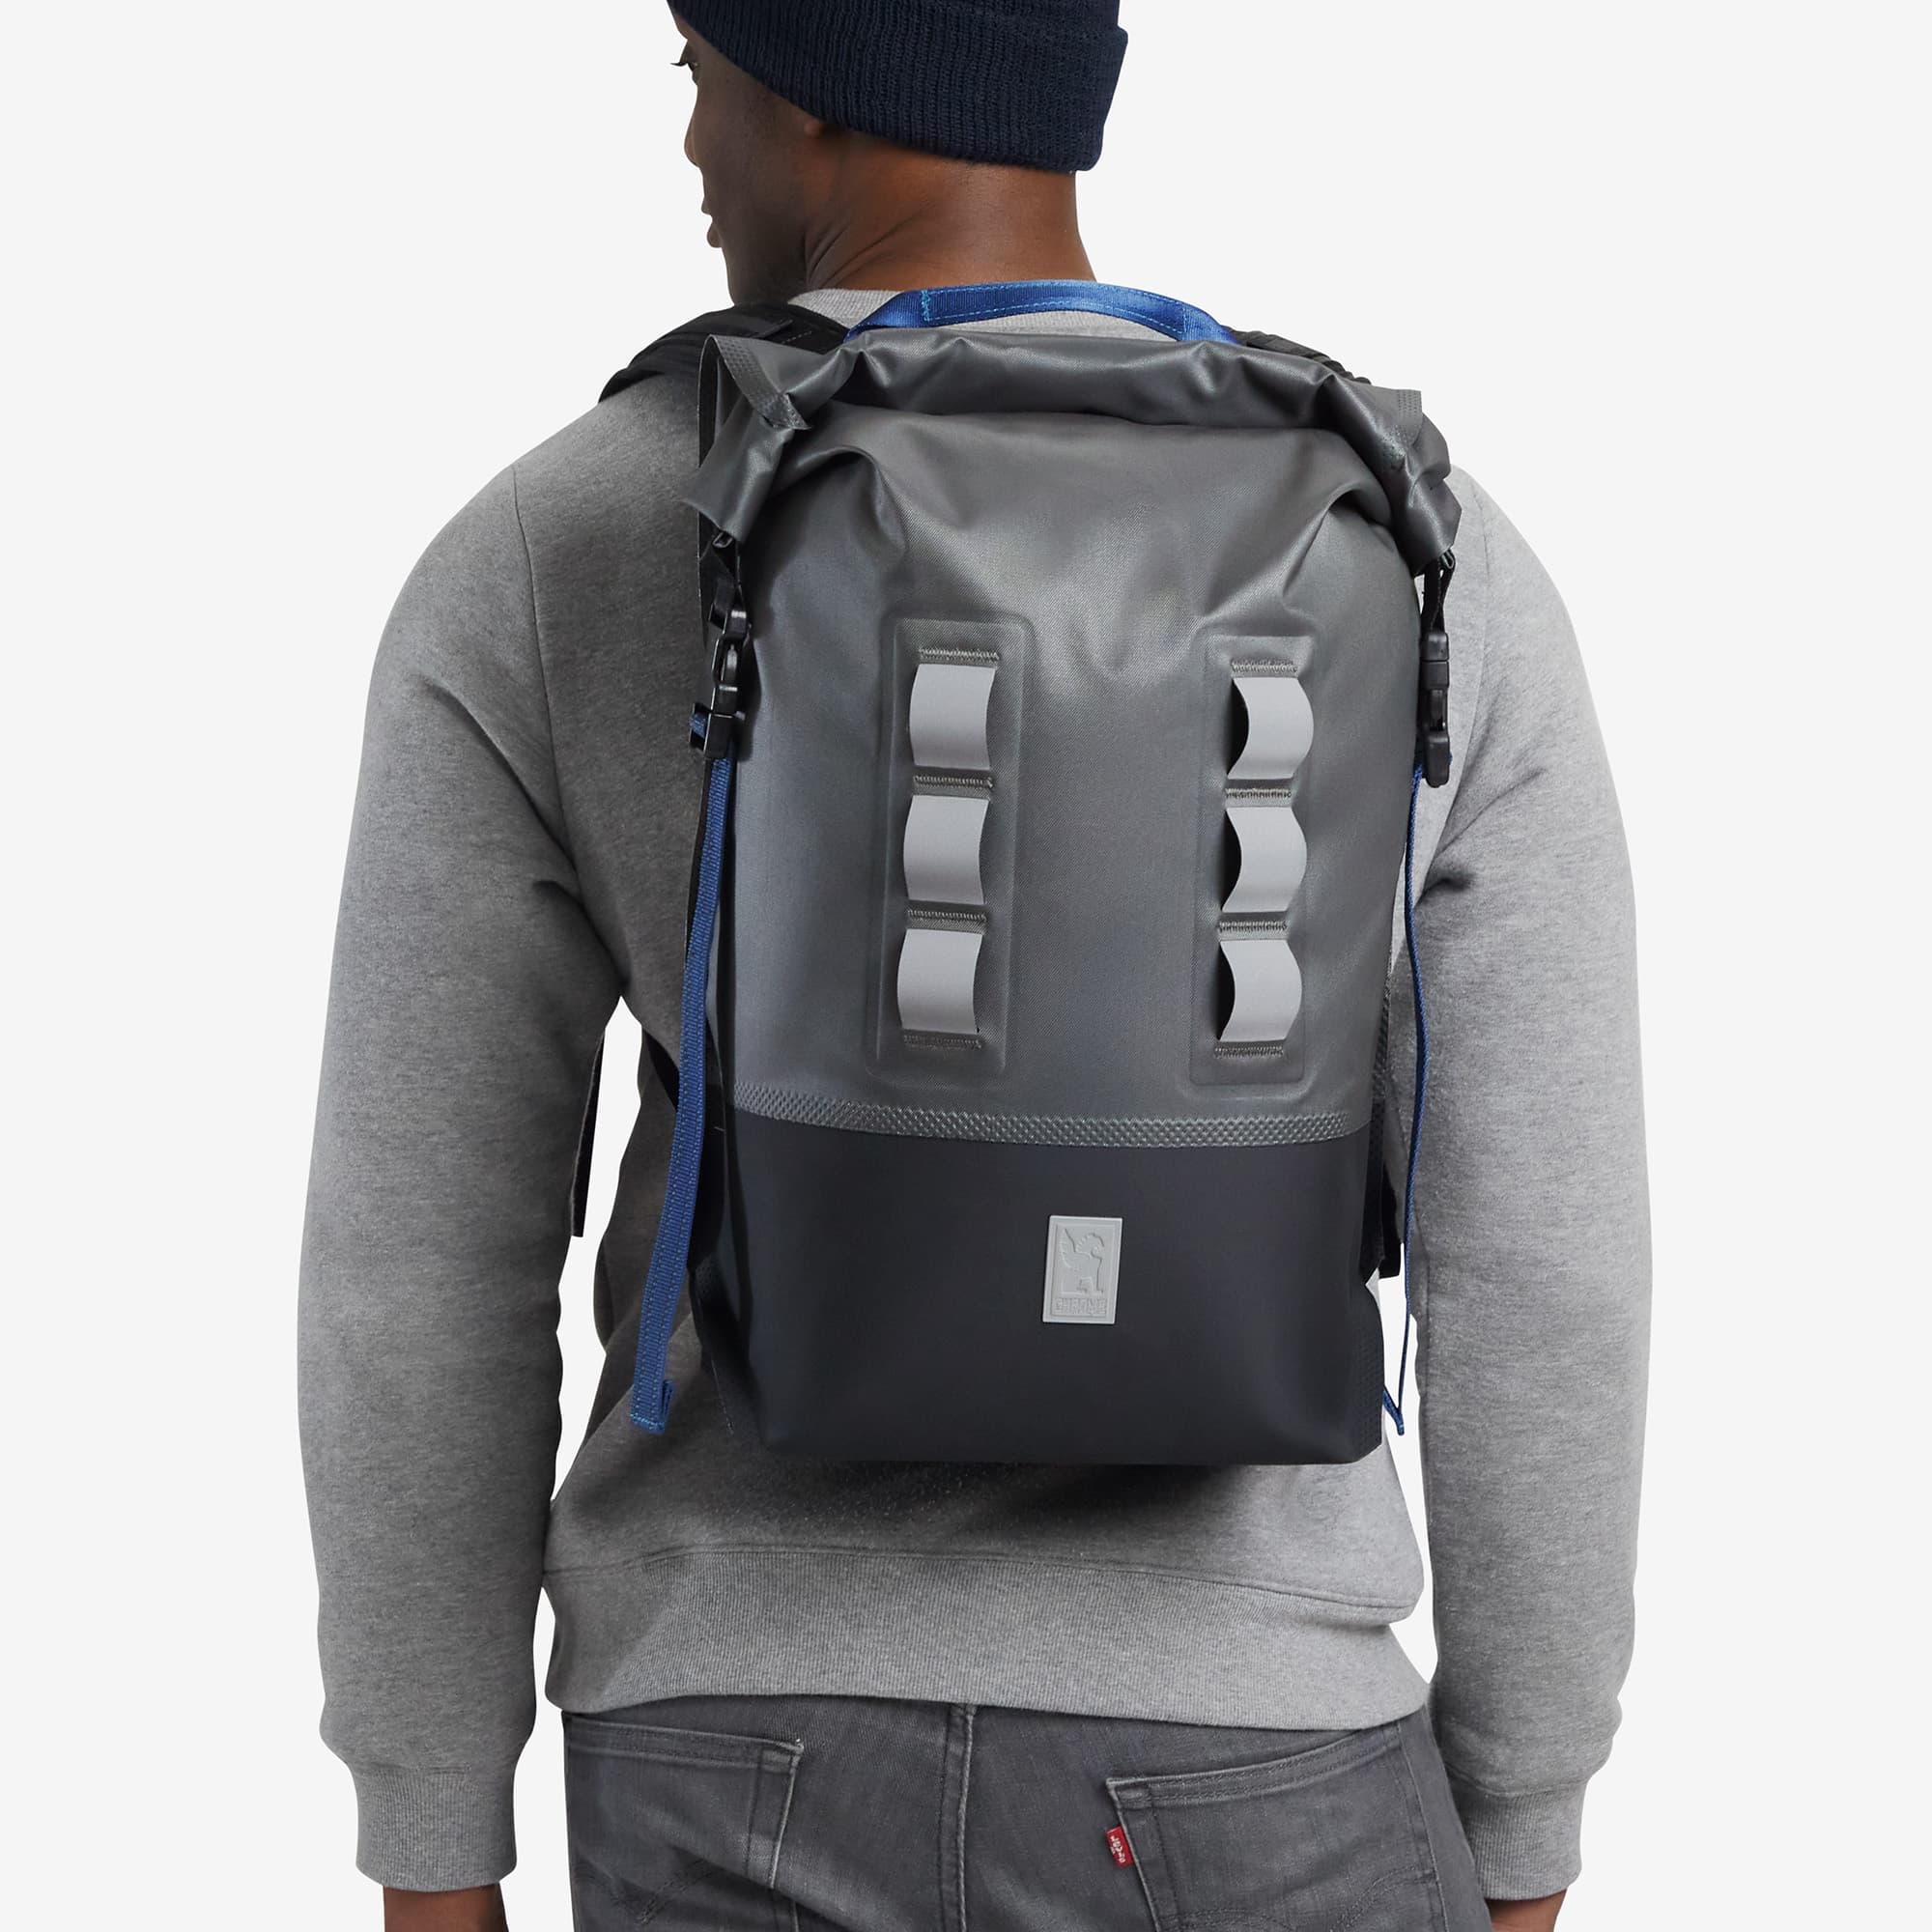 Waterproof 20L highly reflective backpack in grey worn by a man #color_fog